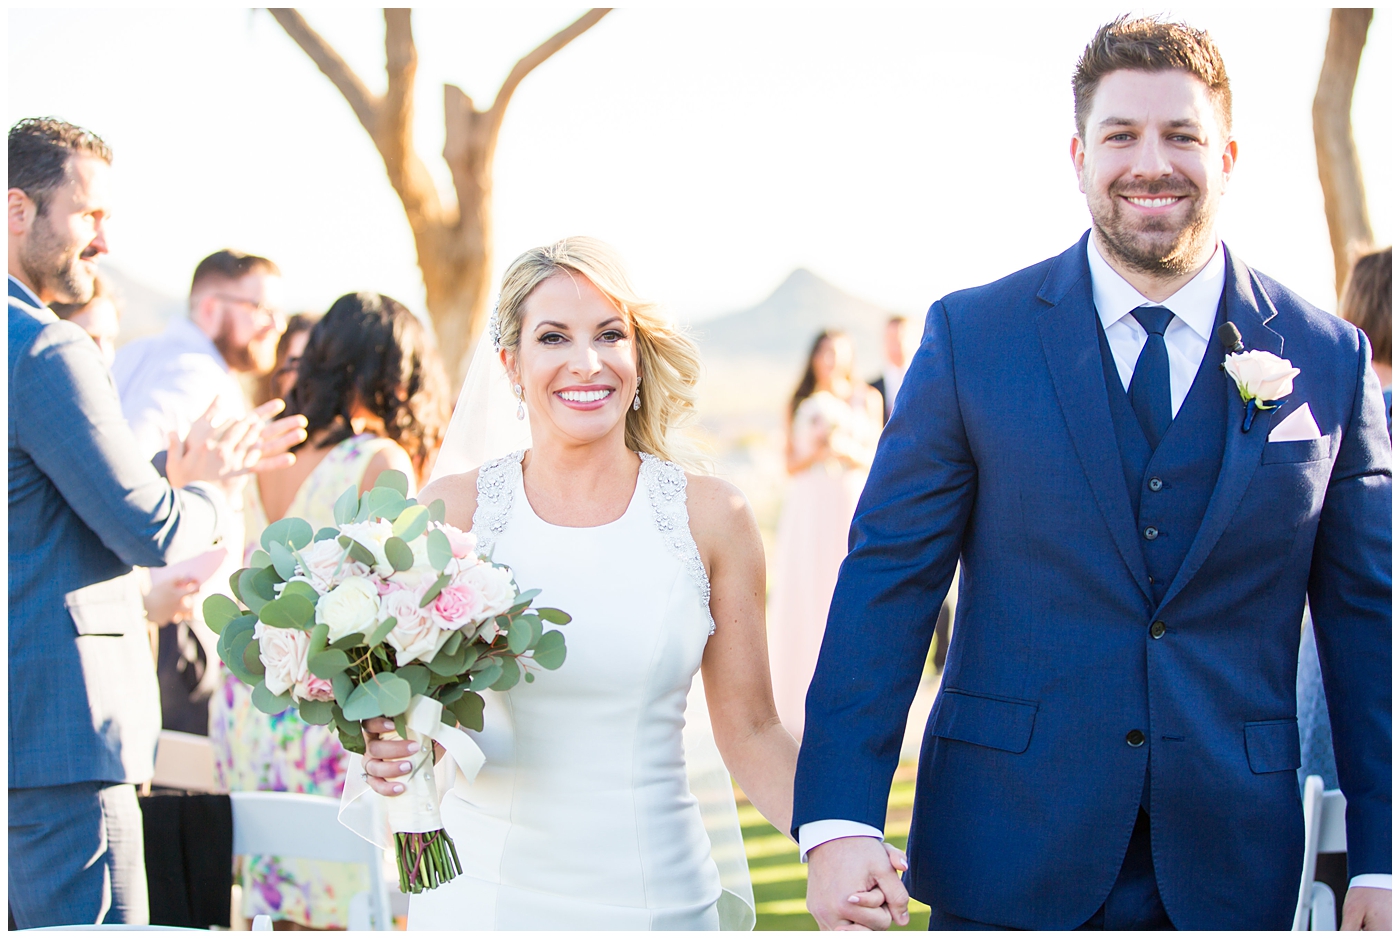 gorgeous bride with side swept hair in racerback pronovias dress and blush pink, white rose and eucalyptus greenery wedding bouquet with groom in navy suit and tie couple portrait at wedding ceremony outside